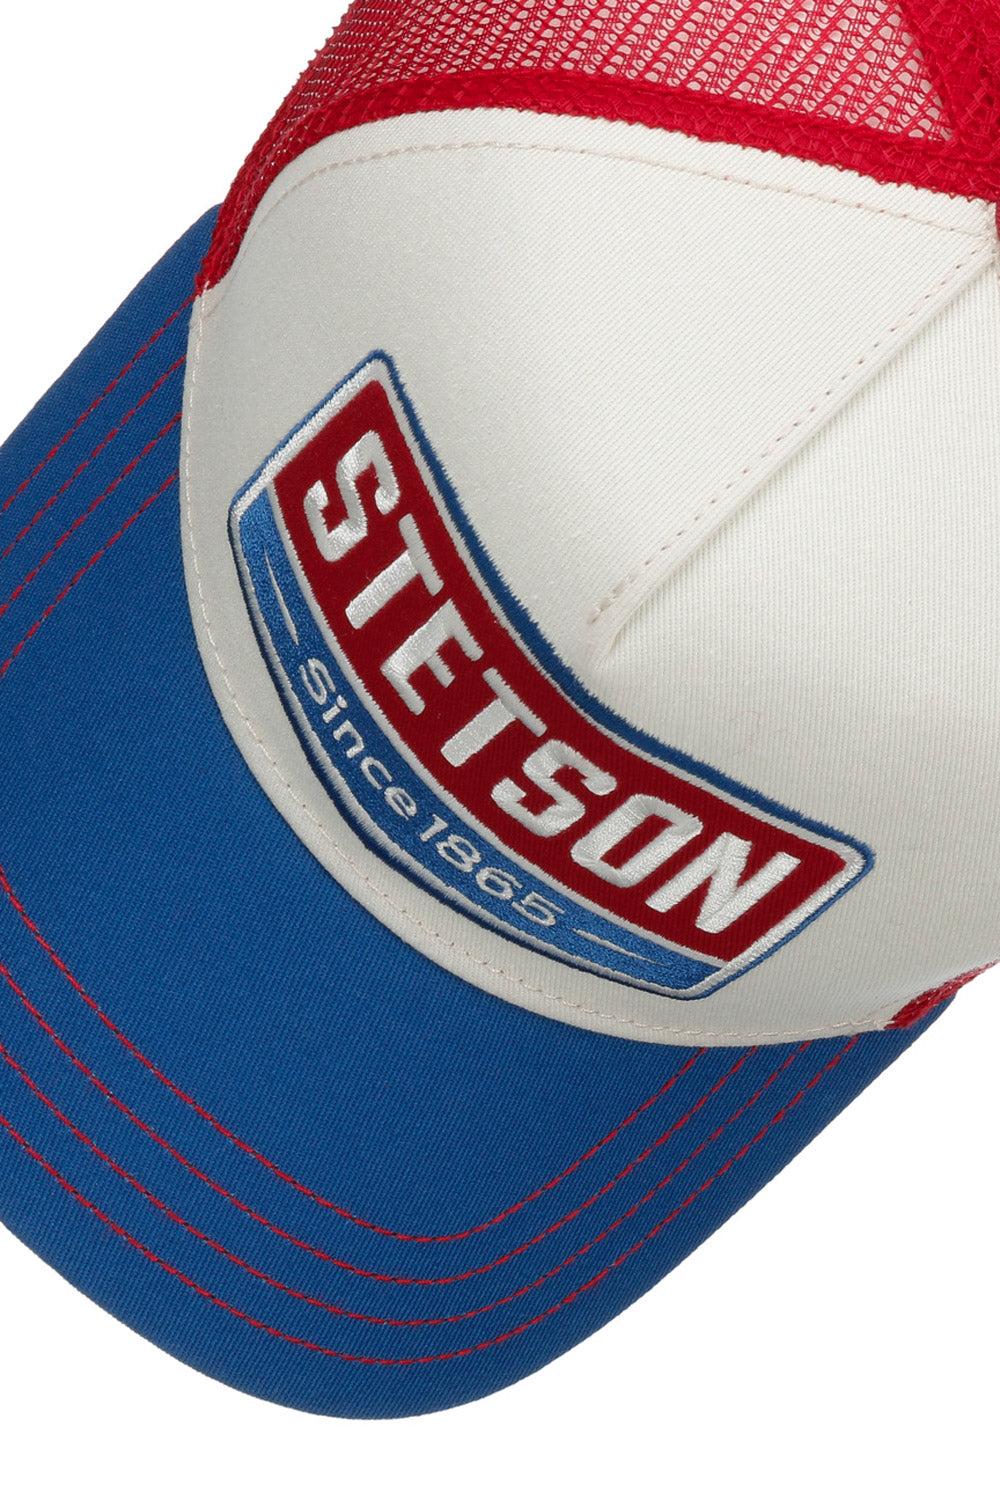 Buy the Stetson Highway Trucker Cap in Blue/White/Red at Intro. Spend £50 for free UK delivery. Official stockists. We ship worldwide.